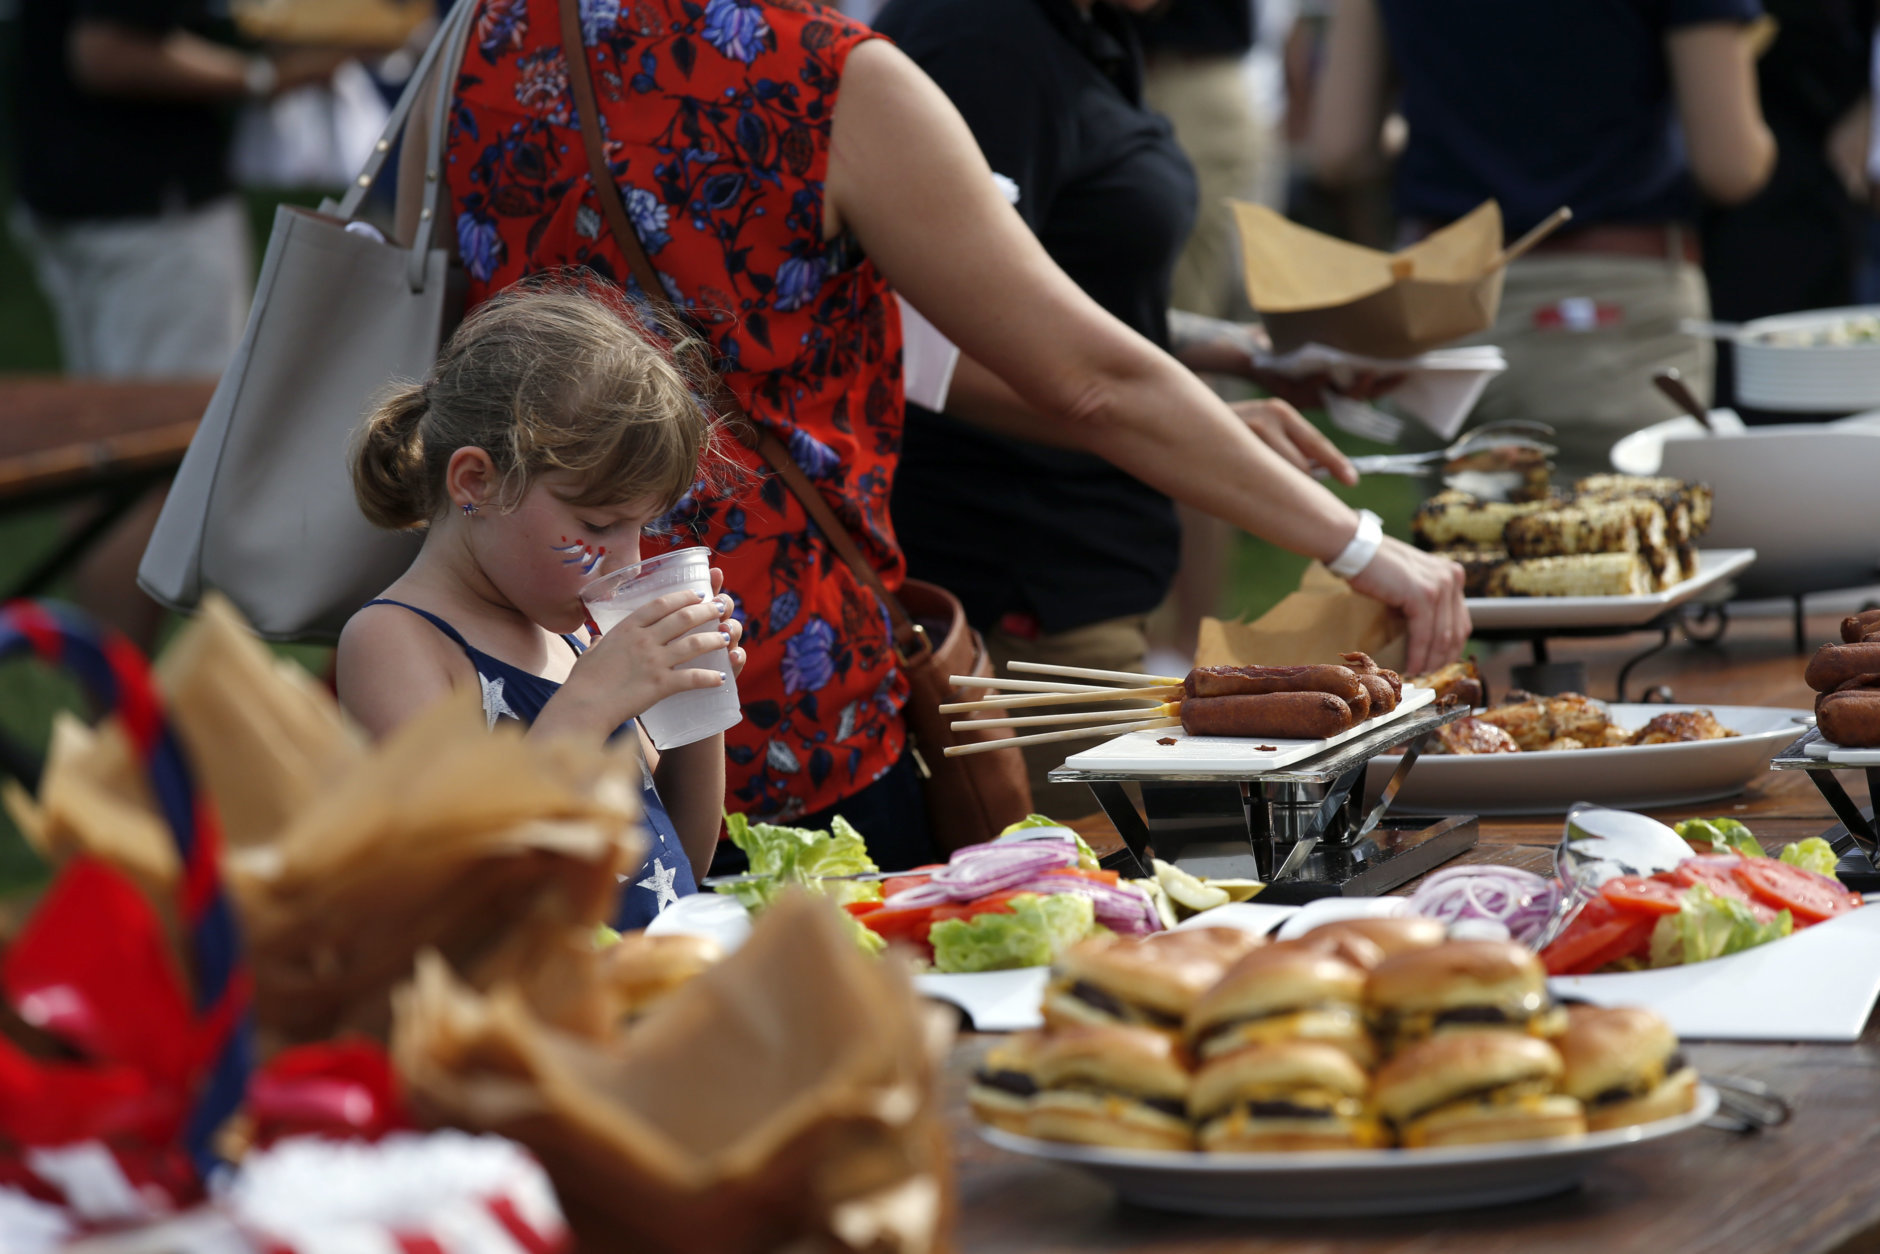 A child takes a drink in front of the food buffet during an afternoon picnic for military families on the South Lawn of the White House, Wednesday, July 4, 2018, in Washington. (AP Photo/Alex Brandon)